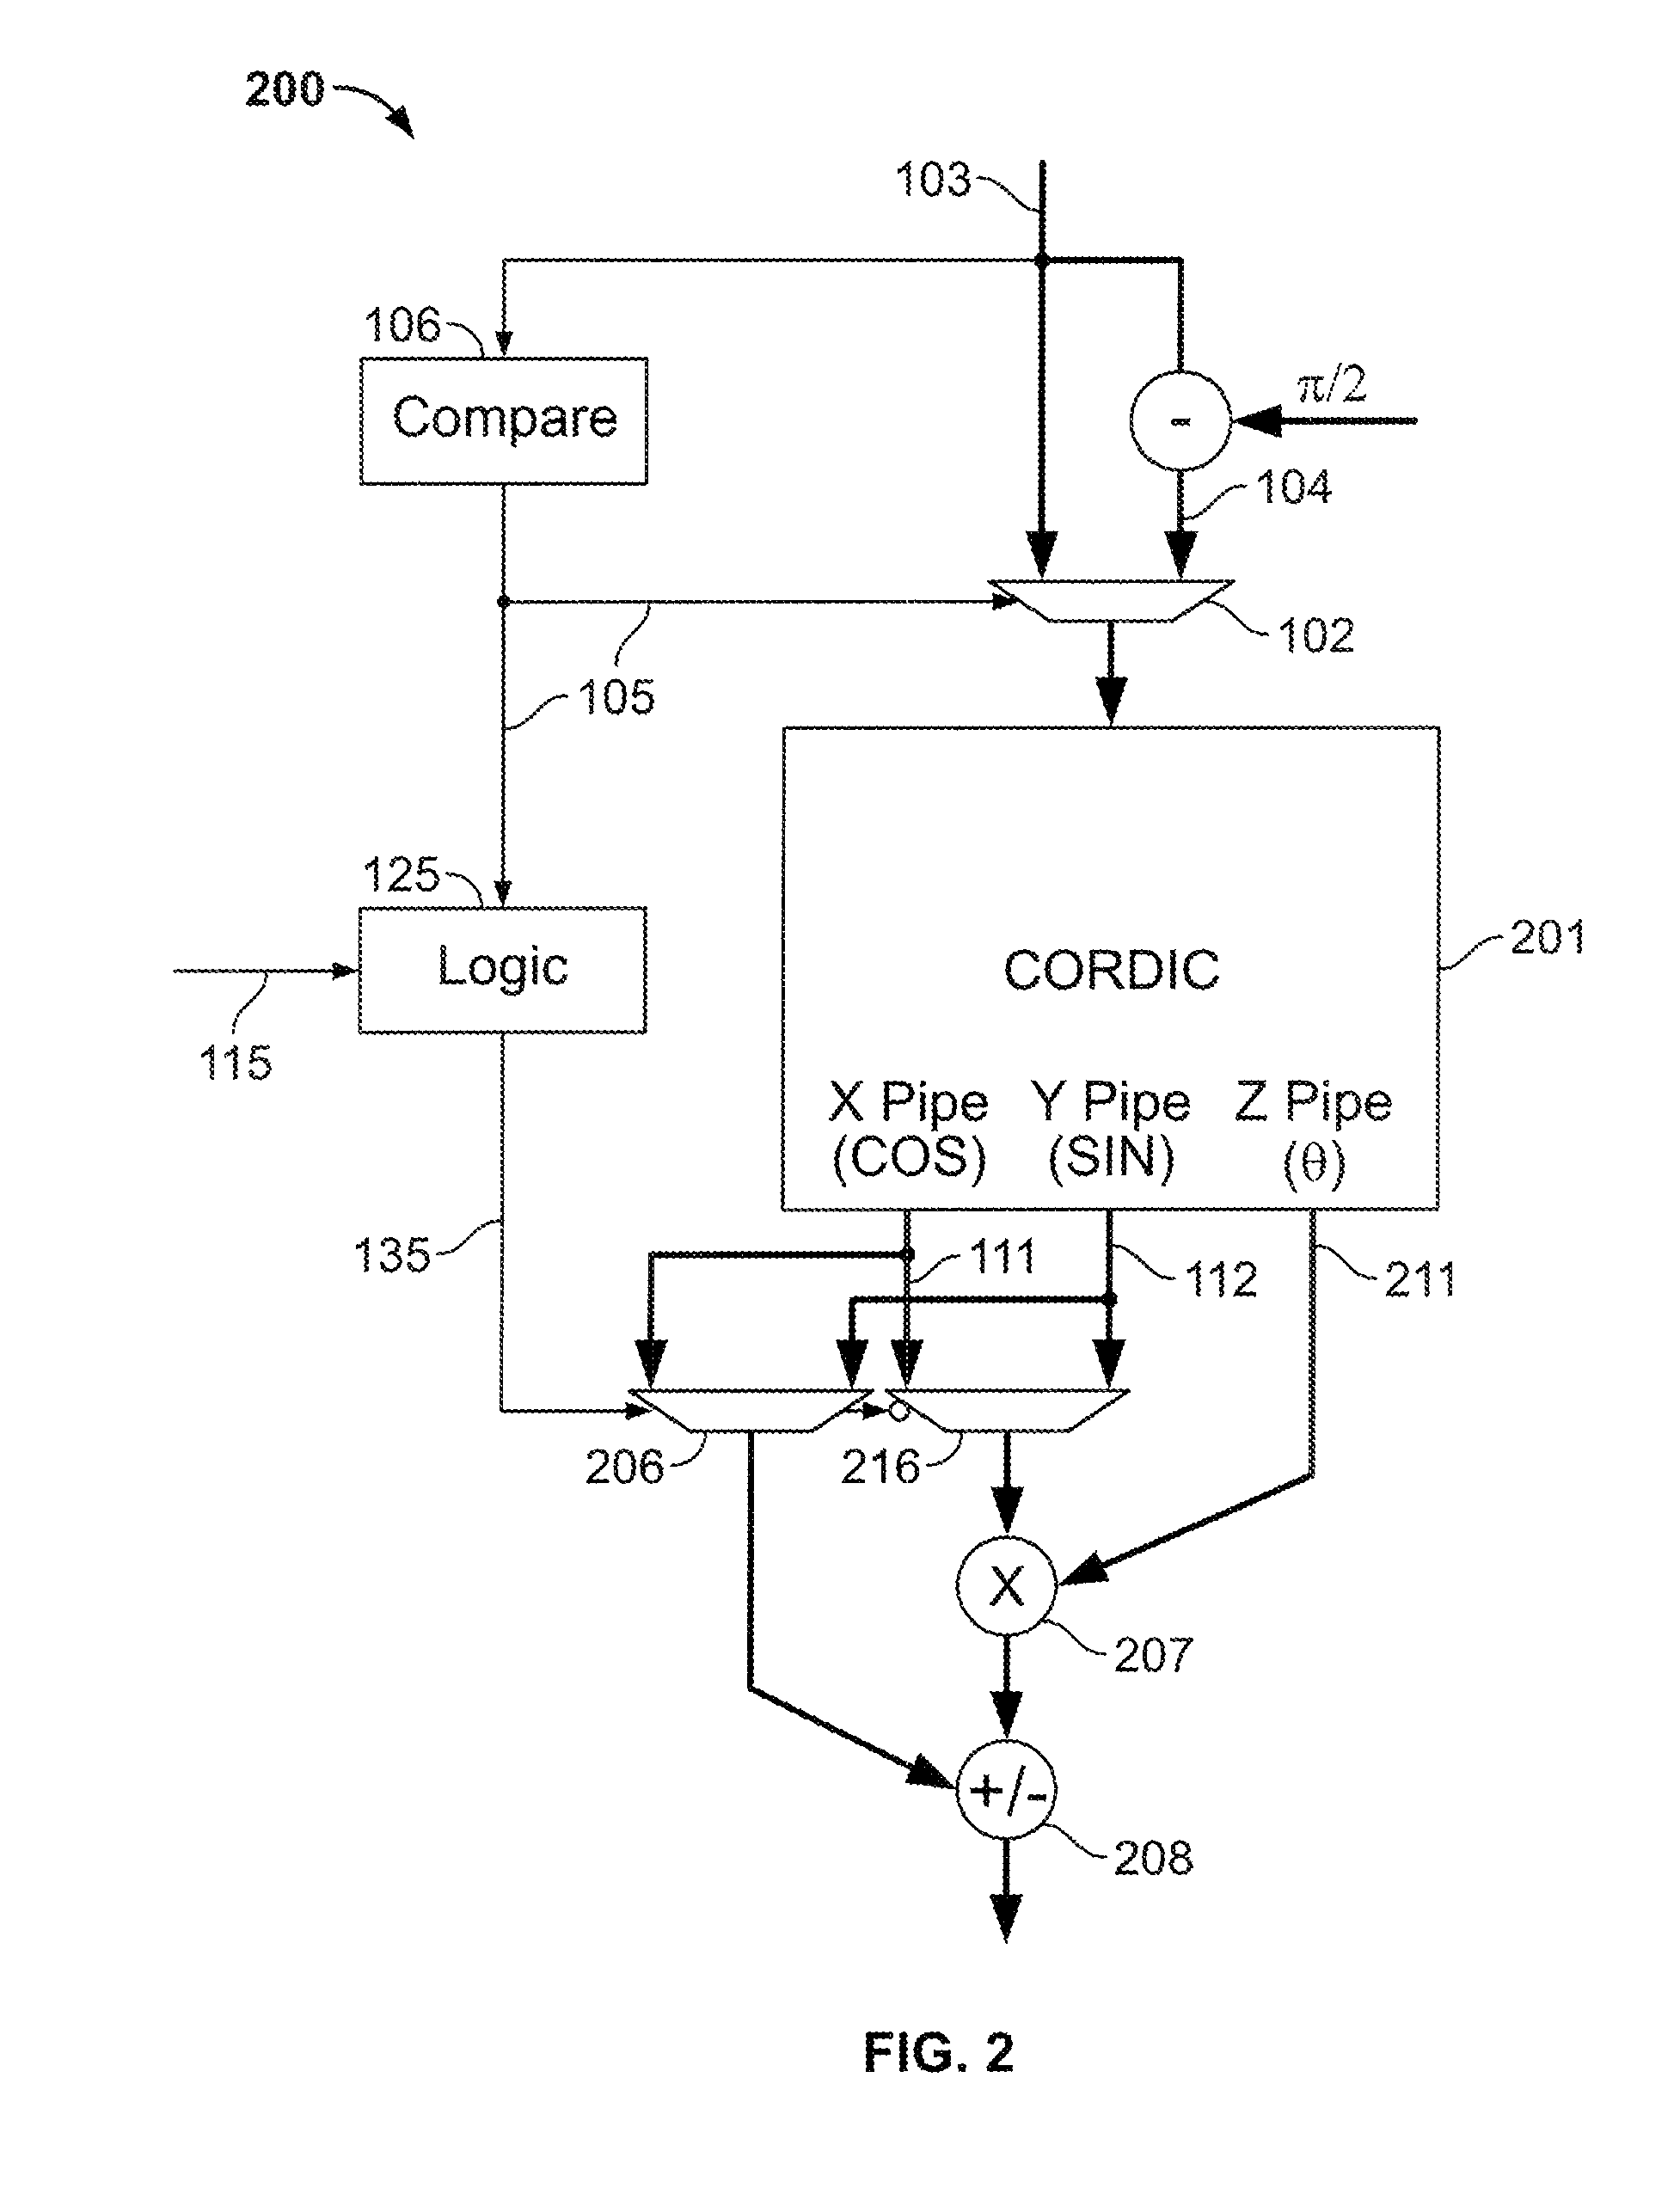 Calculation of trigonometric functions in an integrated circuit device